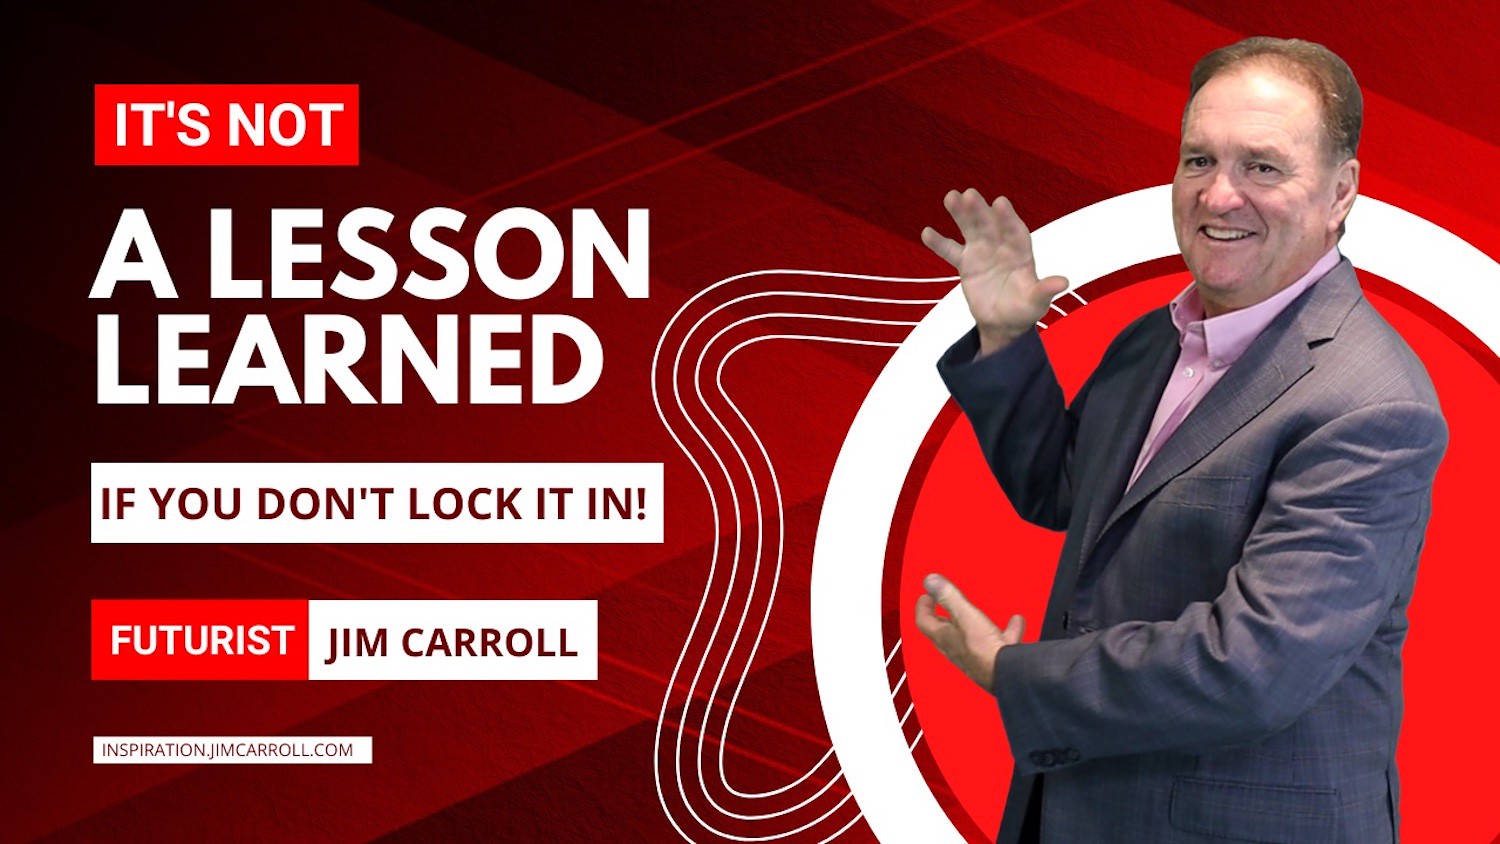 "It's not a lesson learned if you don't lock it in!" - Futurist Jim Carroll